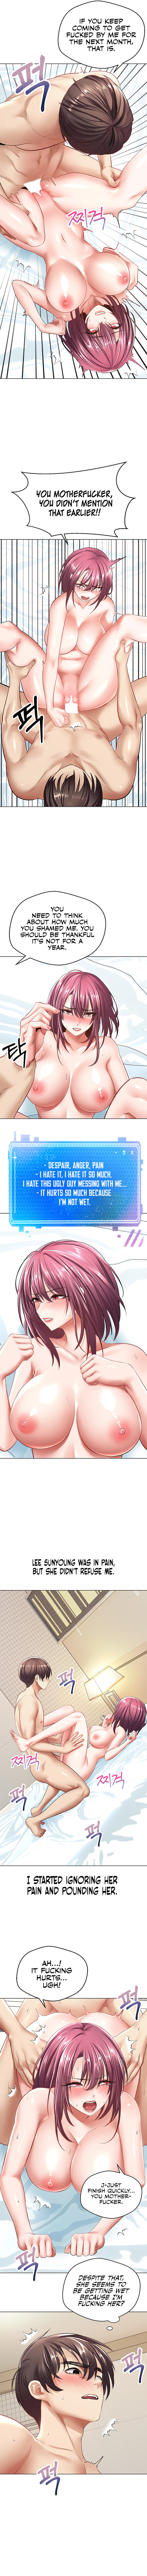 Xem ảnh Desire Realization App Raw - Chapter 05 - 08fa09d4c0186eed90 - Hentai24h.Tv